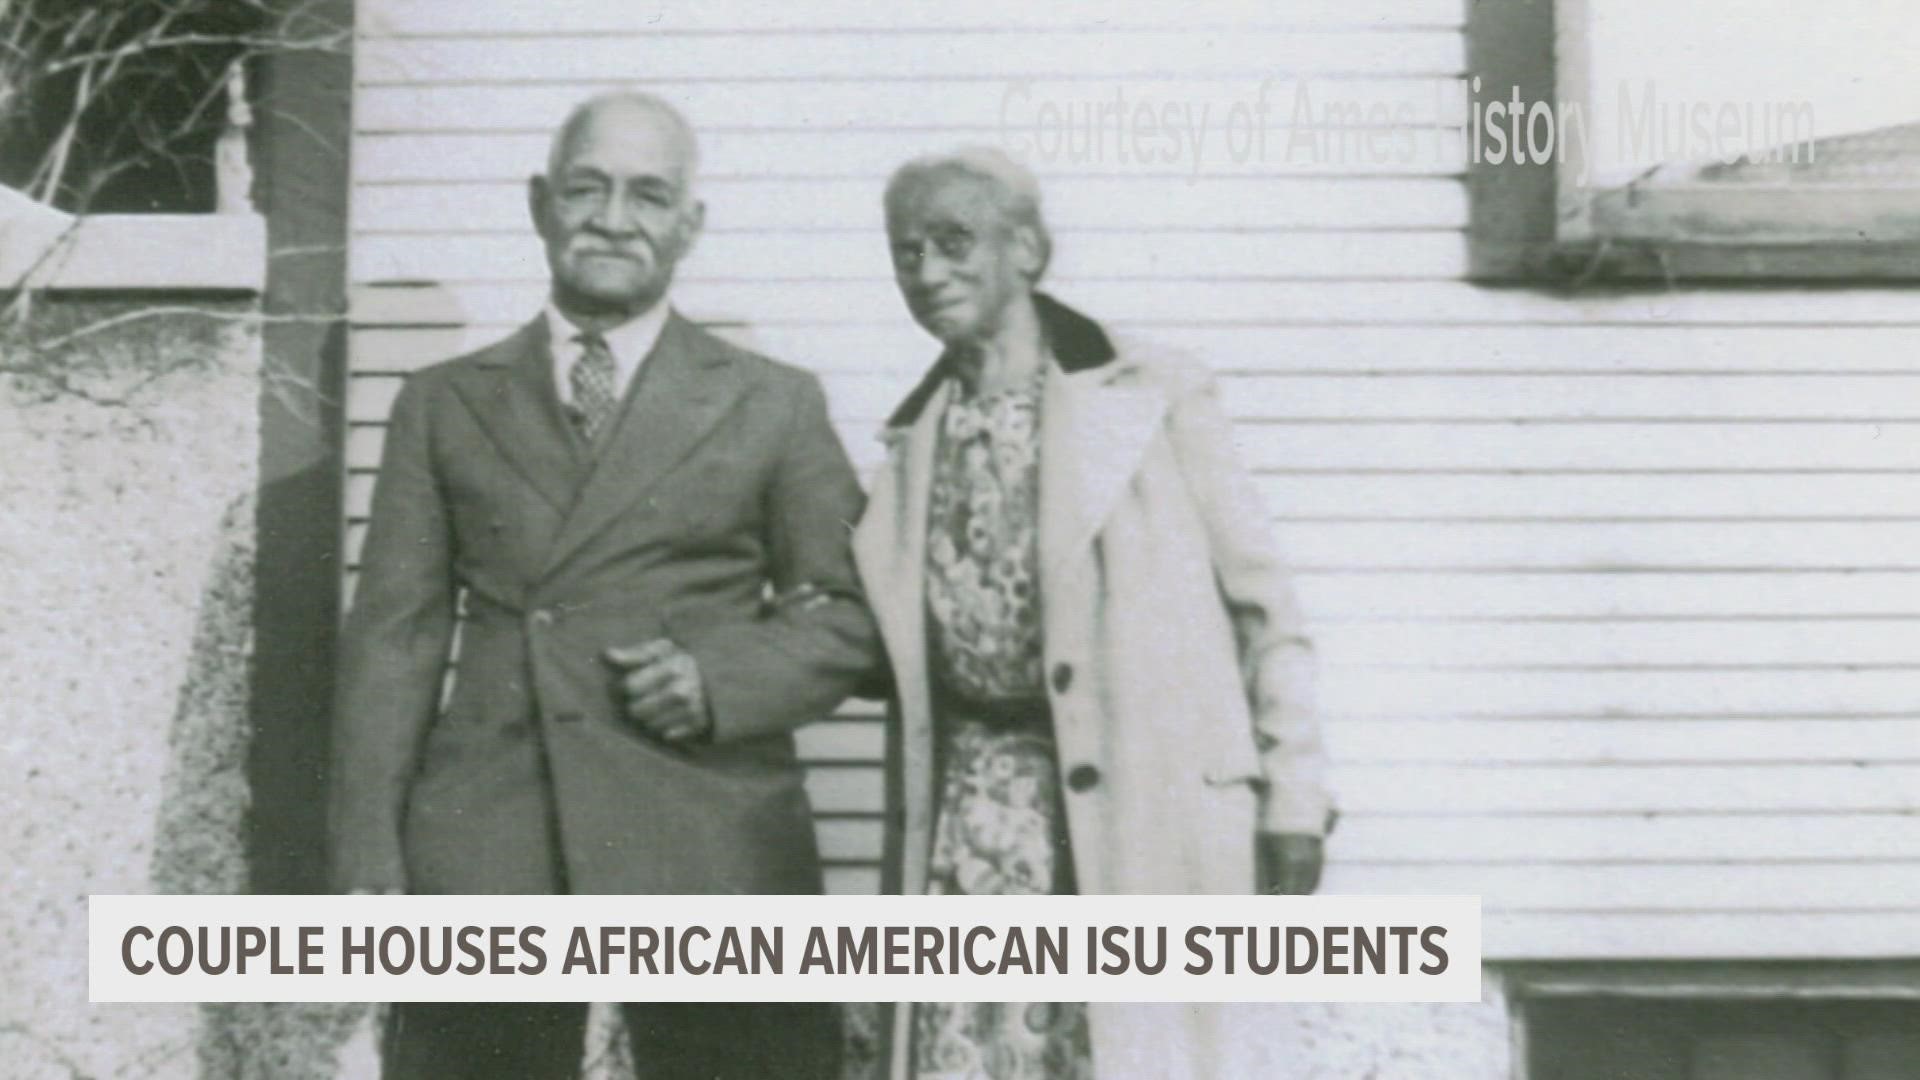 Archie and Nancy Martin opened up their home to Black male ISU students, giving them a place to live, during a time when they weren't allowed to live on campus.